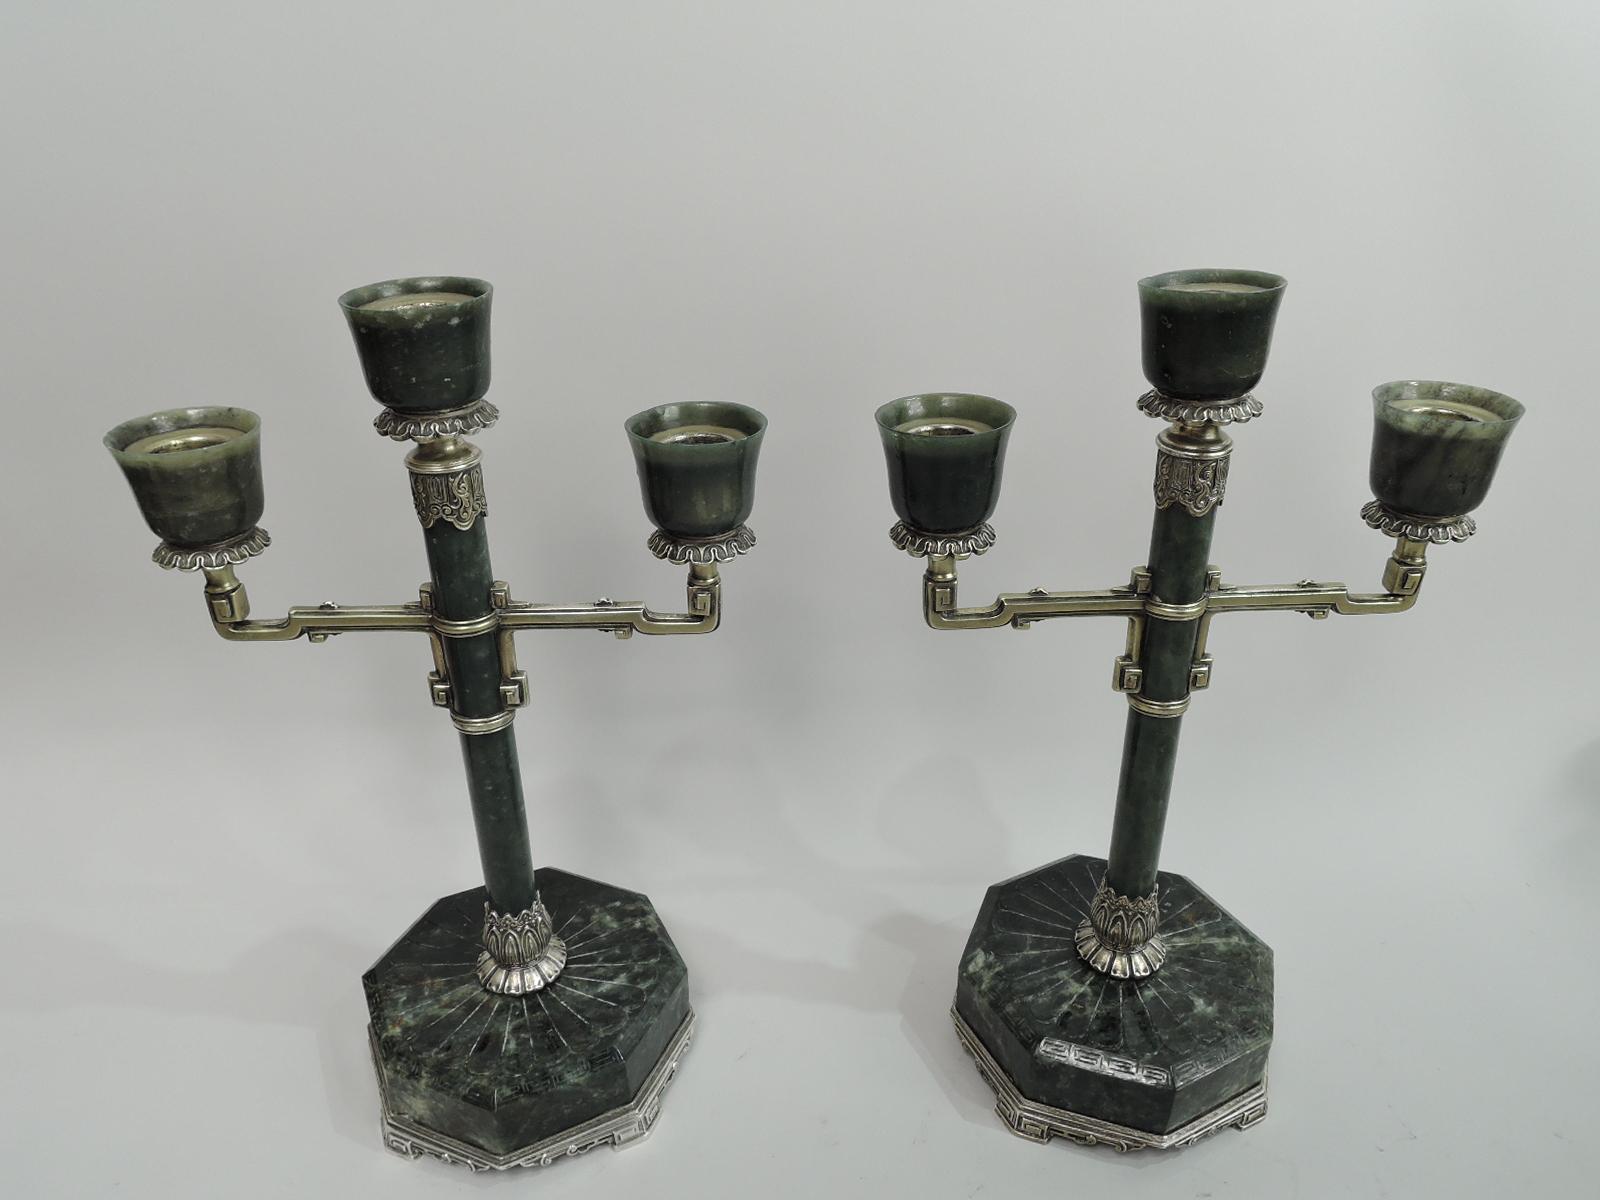 Pair of Art Deco Classical jade and gilt sterling silver candelabra. Made by Lebkuecher in Newark, ca 1920. Each: Cylindrical jade shaft on same octagonal base with carved petal flutes and fretwork. Curvilinear silver gilt arms with block volute